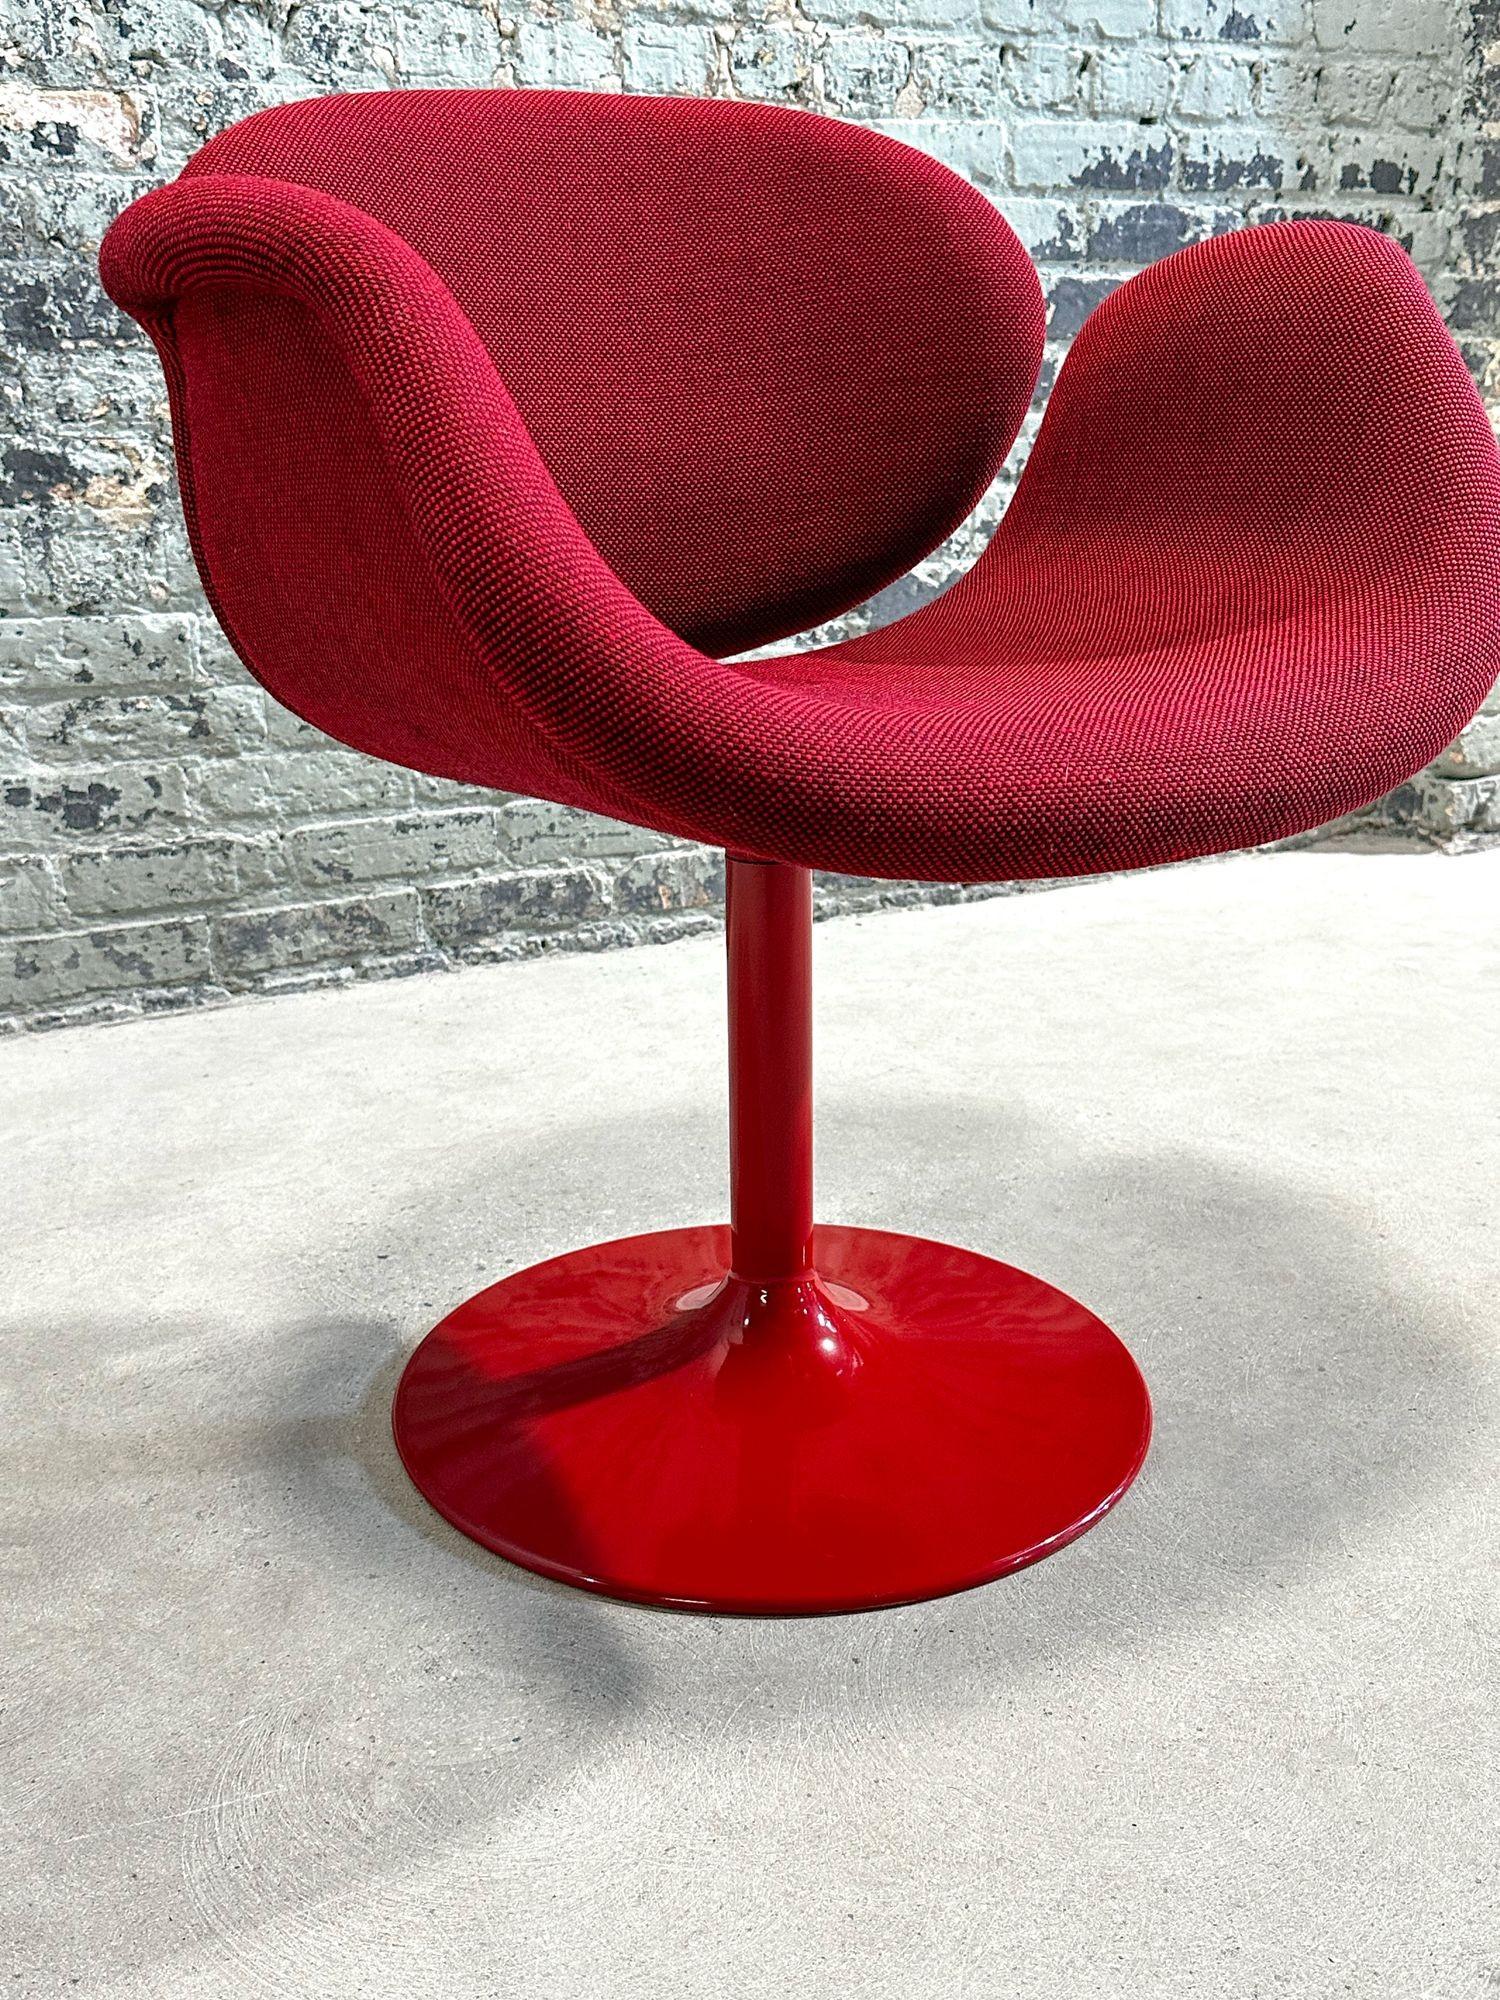 Pierre Paulin Tulip Midi Chair with Aluminum Base, by Artifort 1960's. Chair is all original with an aluminum red base.
Measures 27